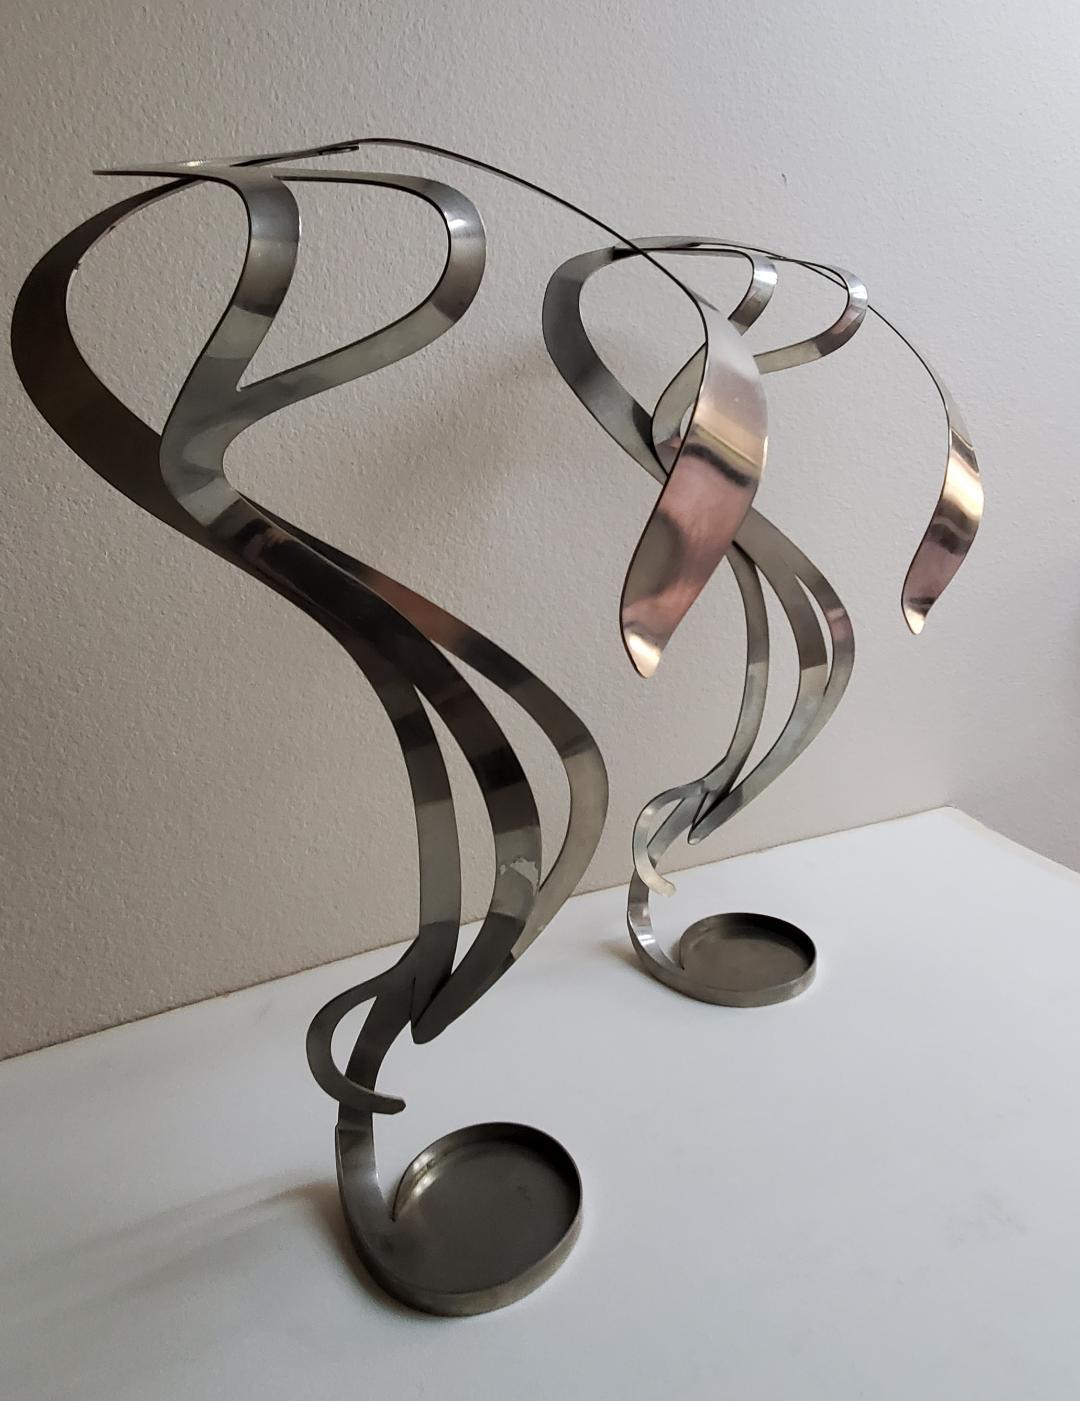 2 Art Nouveau Styled Candle Holders Crafted Into Swirling Twirling Metal Smoke  For Sale 11